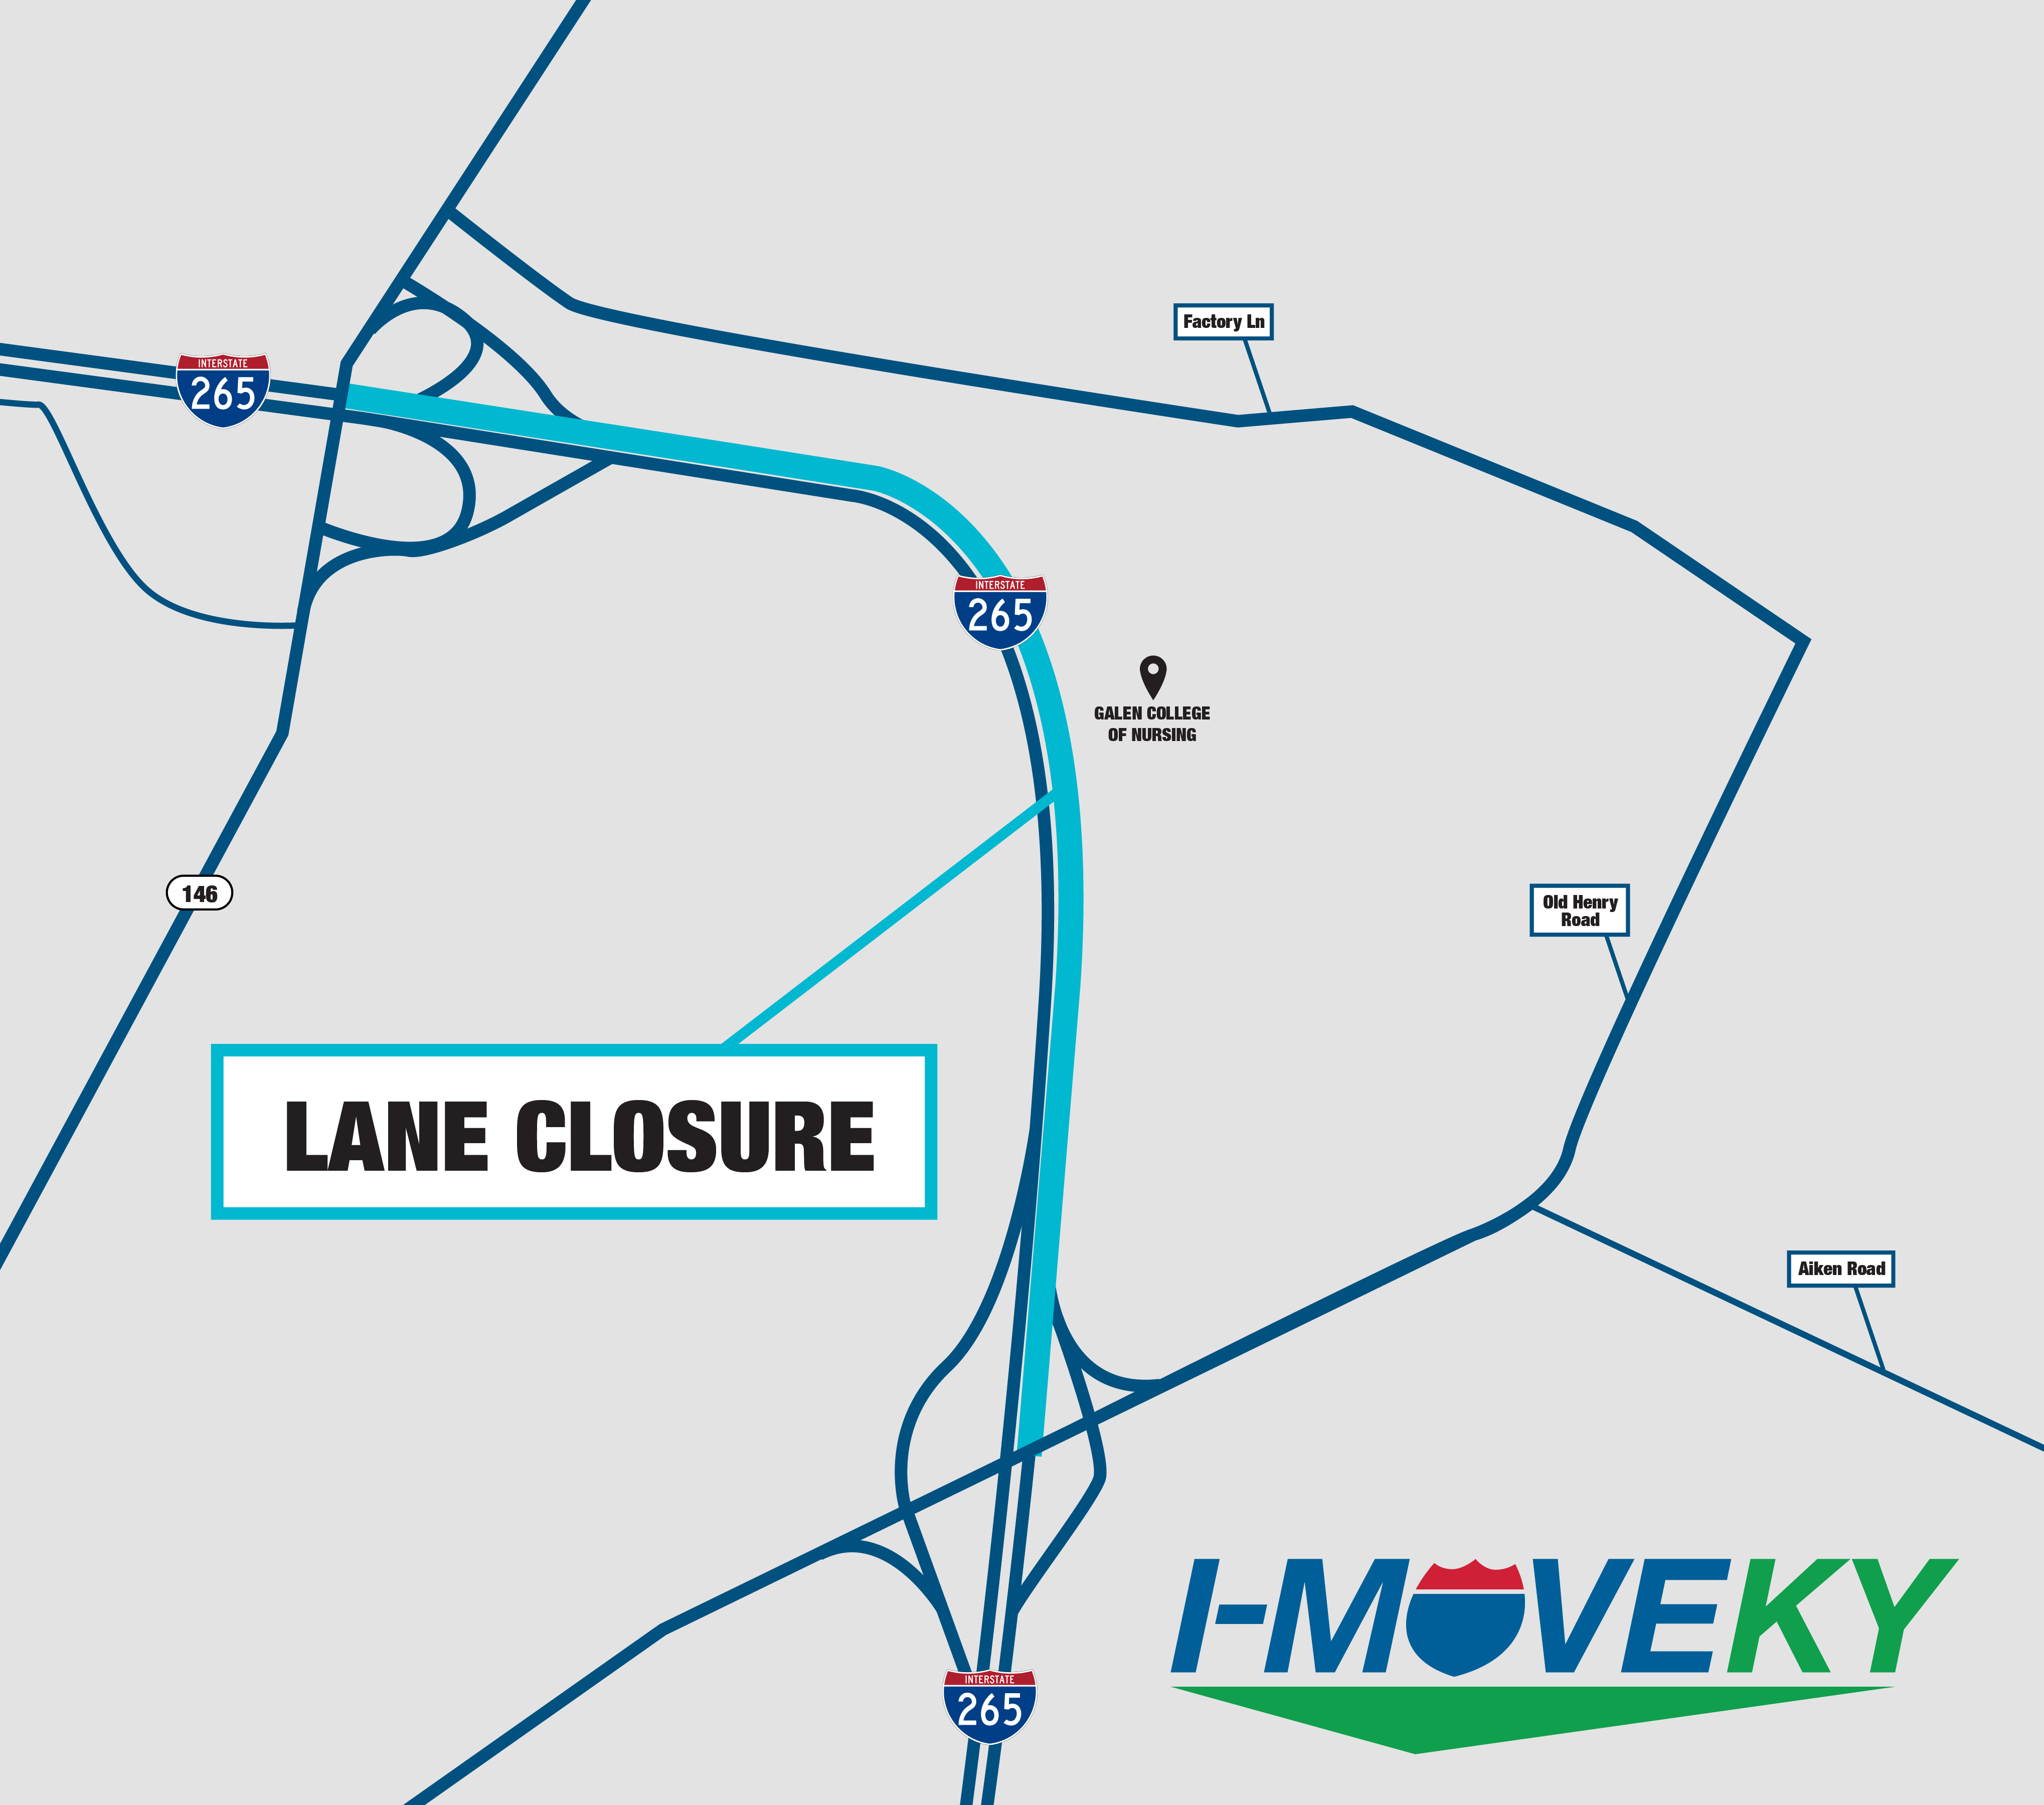 A gray map showing the lane closure on I-265 North in blue.